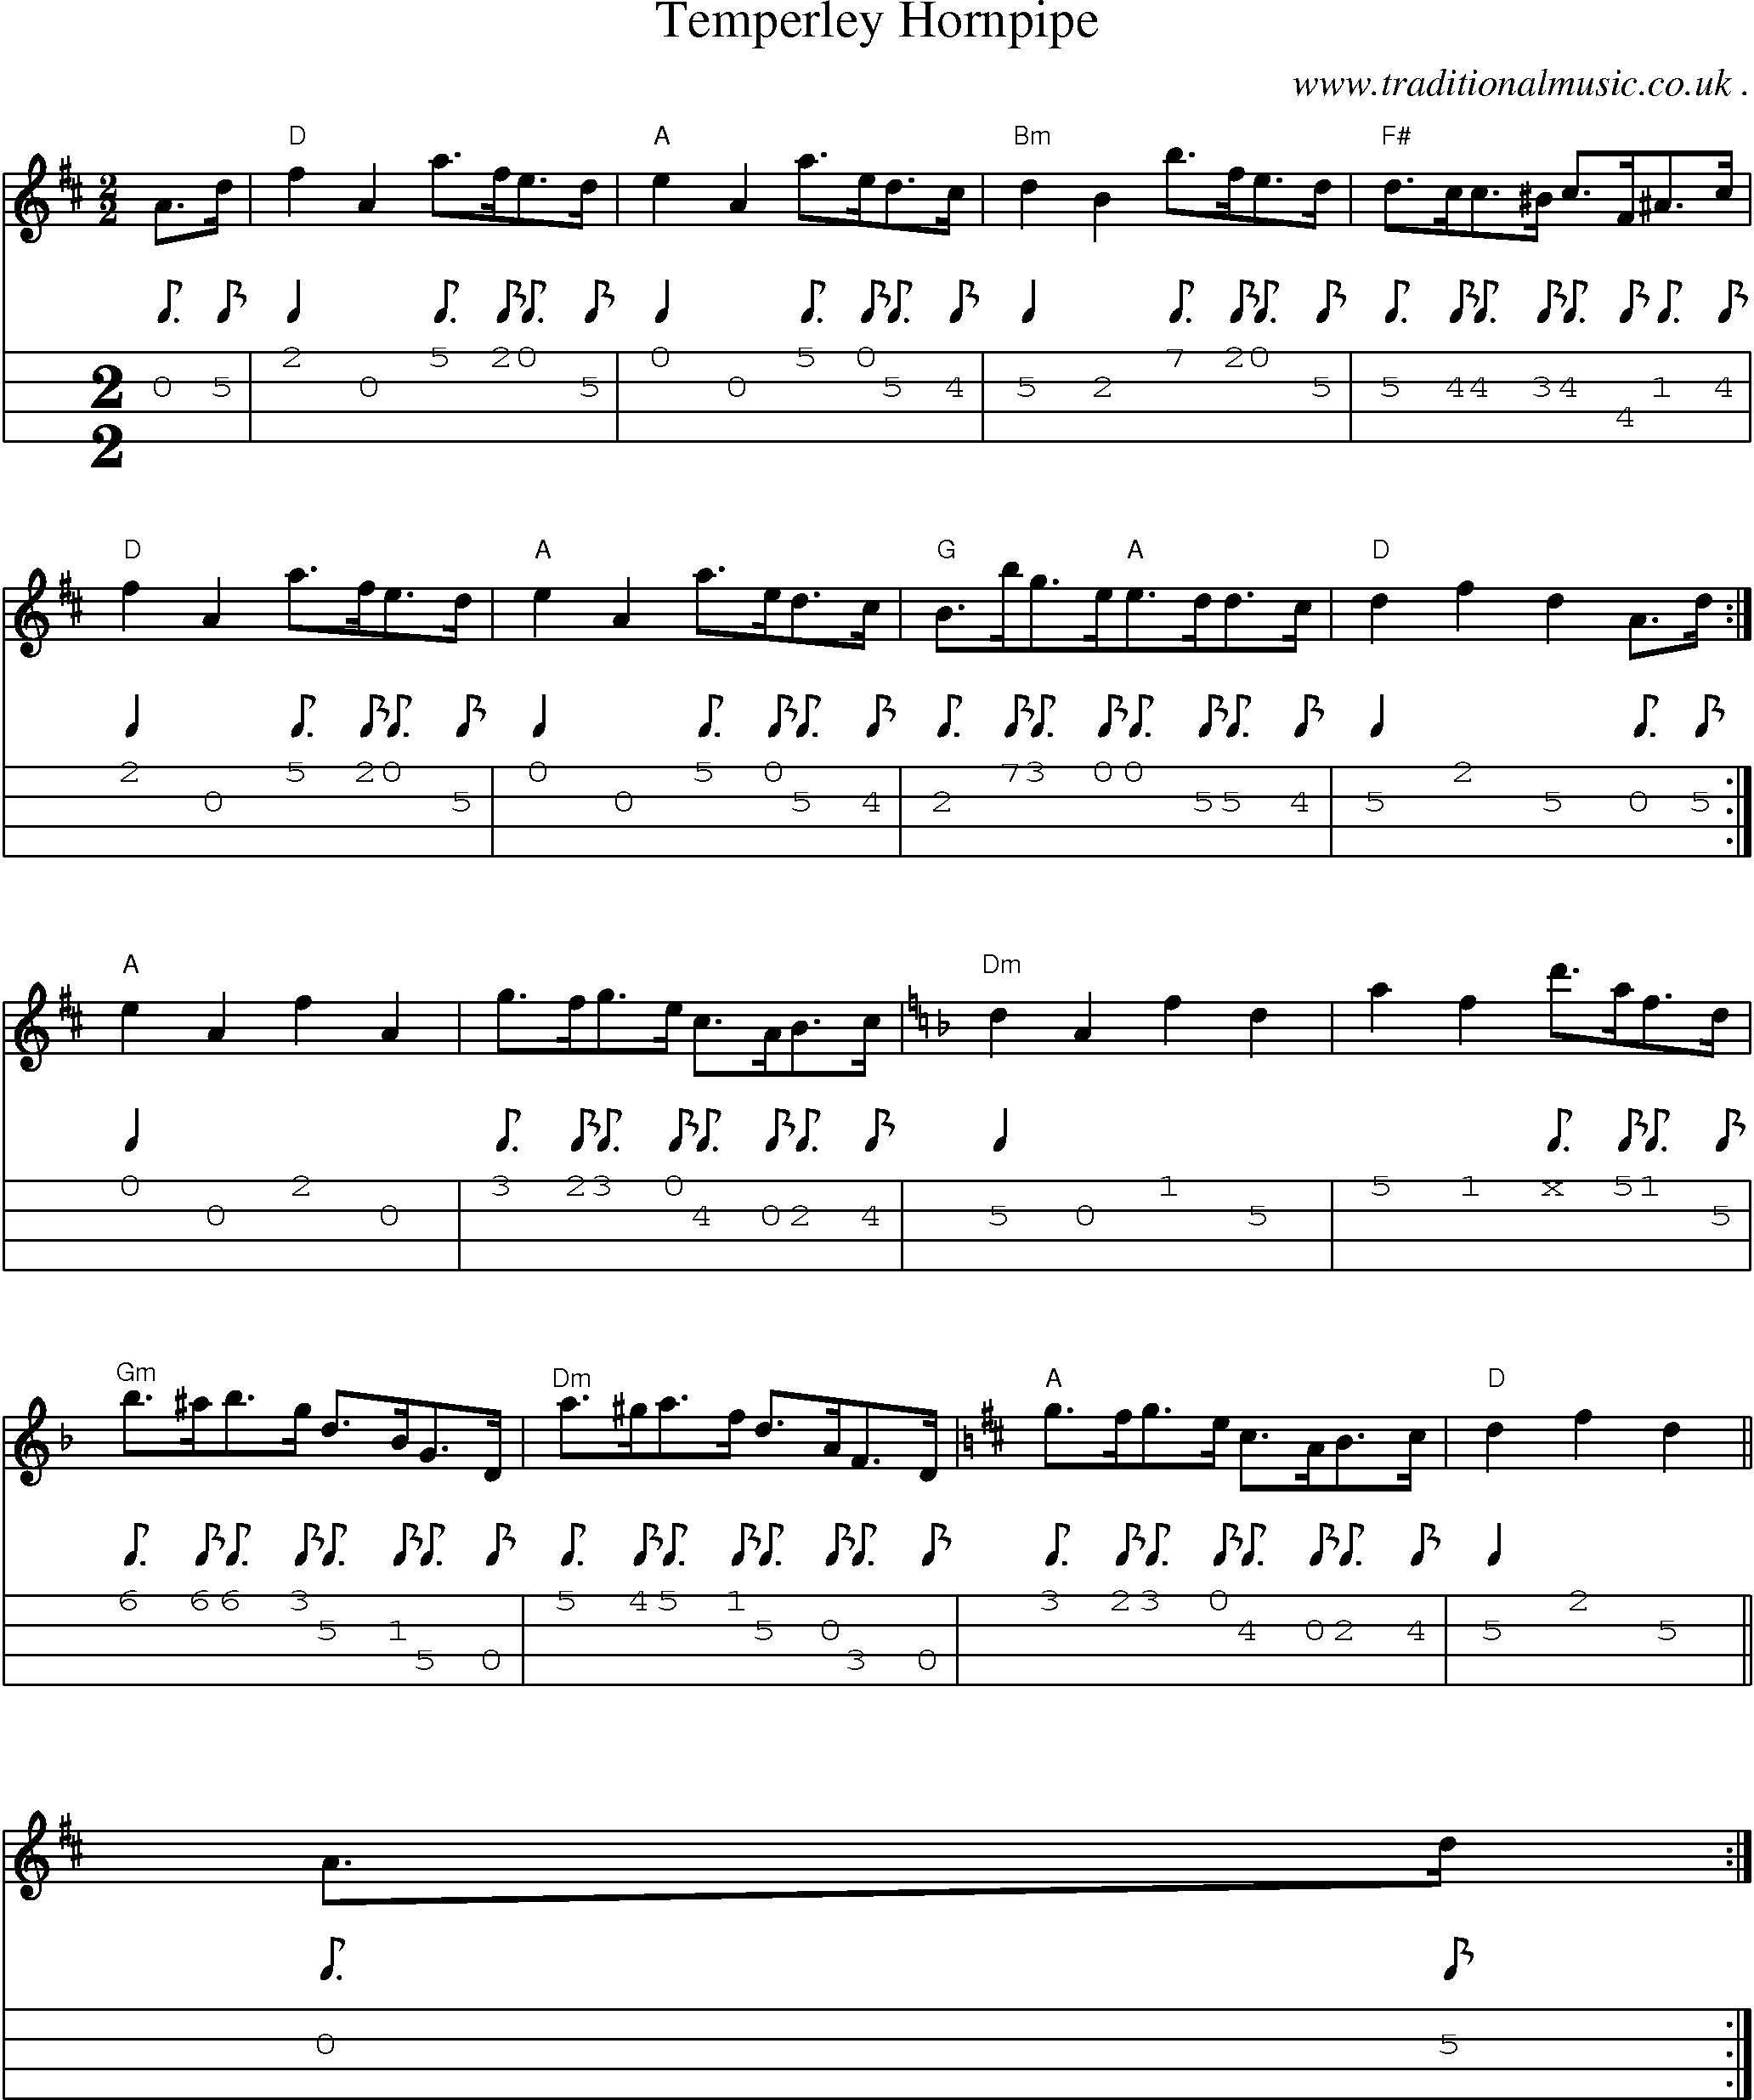 Sheet-Music and Mandolin Tabs for Temperley Hornpipe